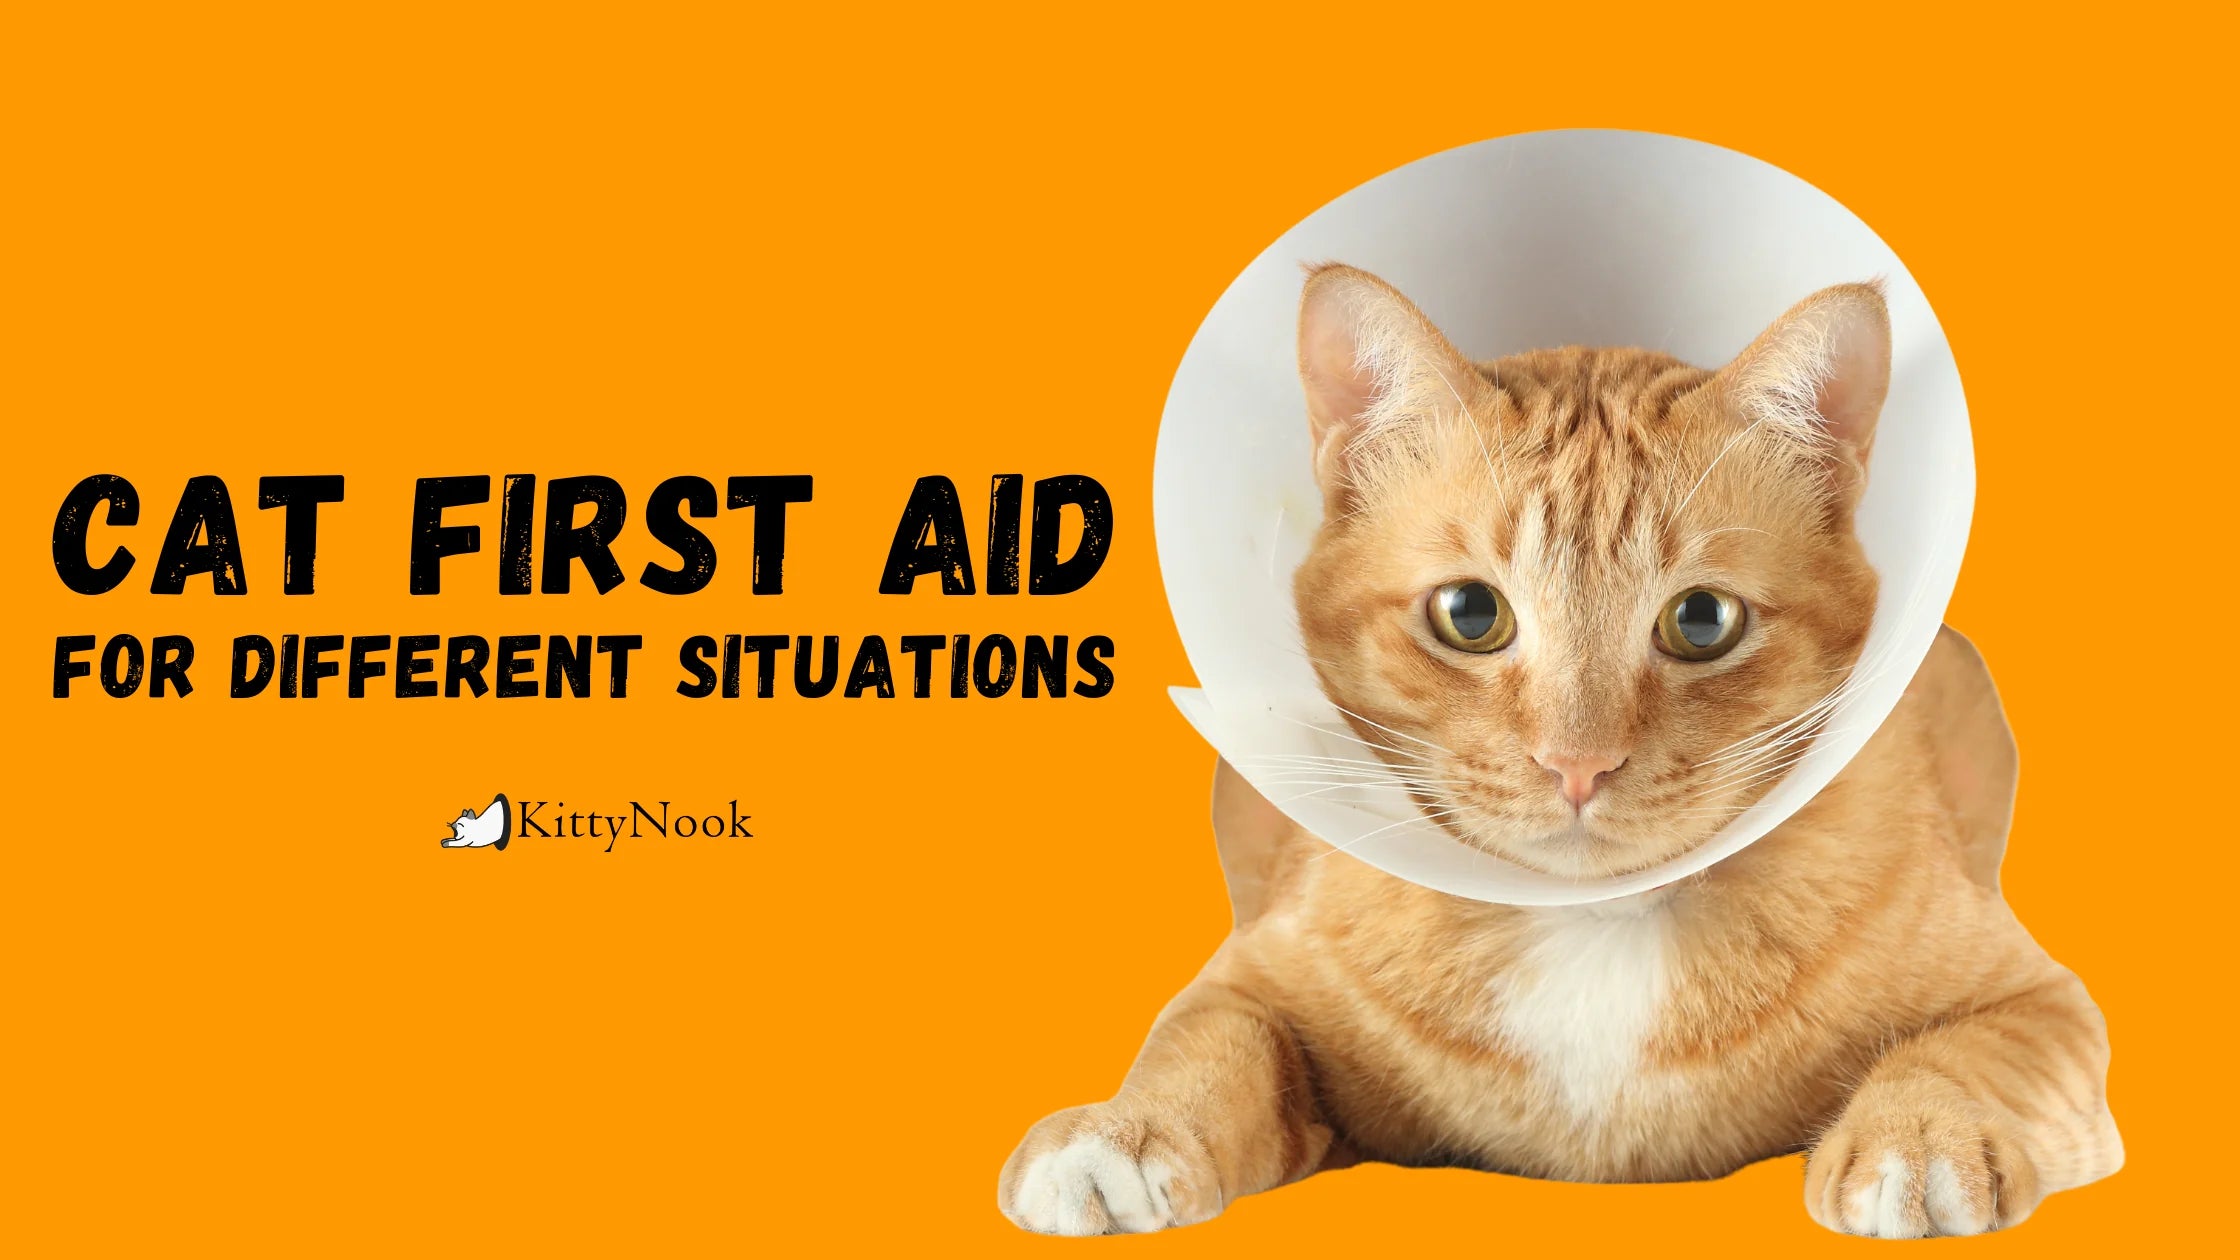 Cat First Aid For Different Situations - KittyNook Cat Company